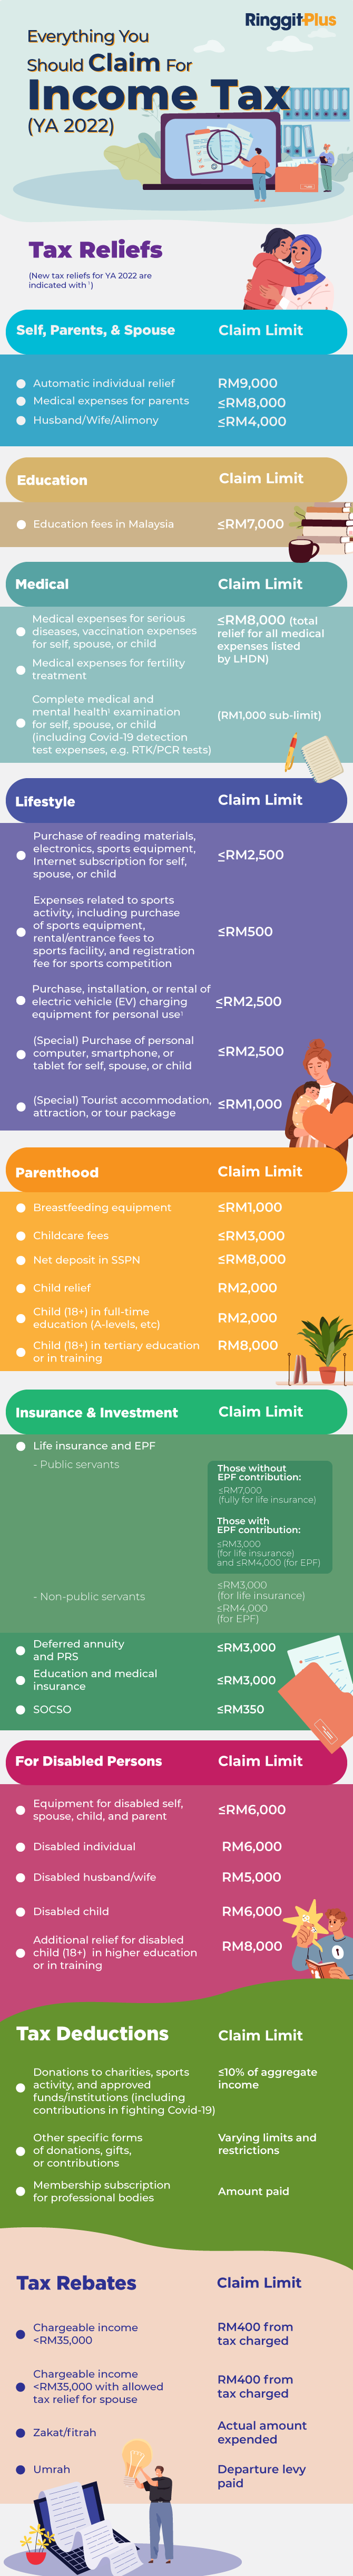 malaysia-personal-income-tax-relief-2022